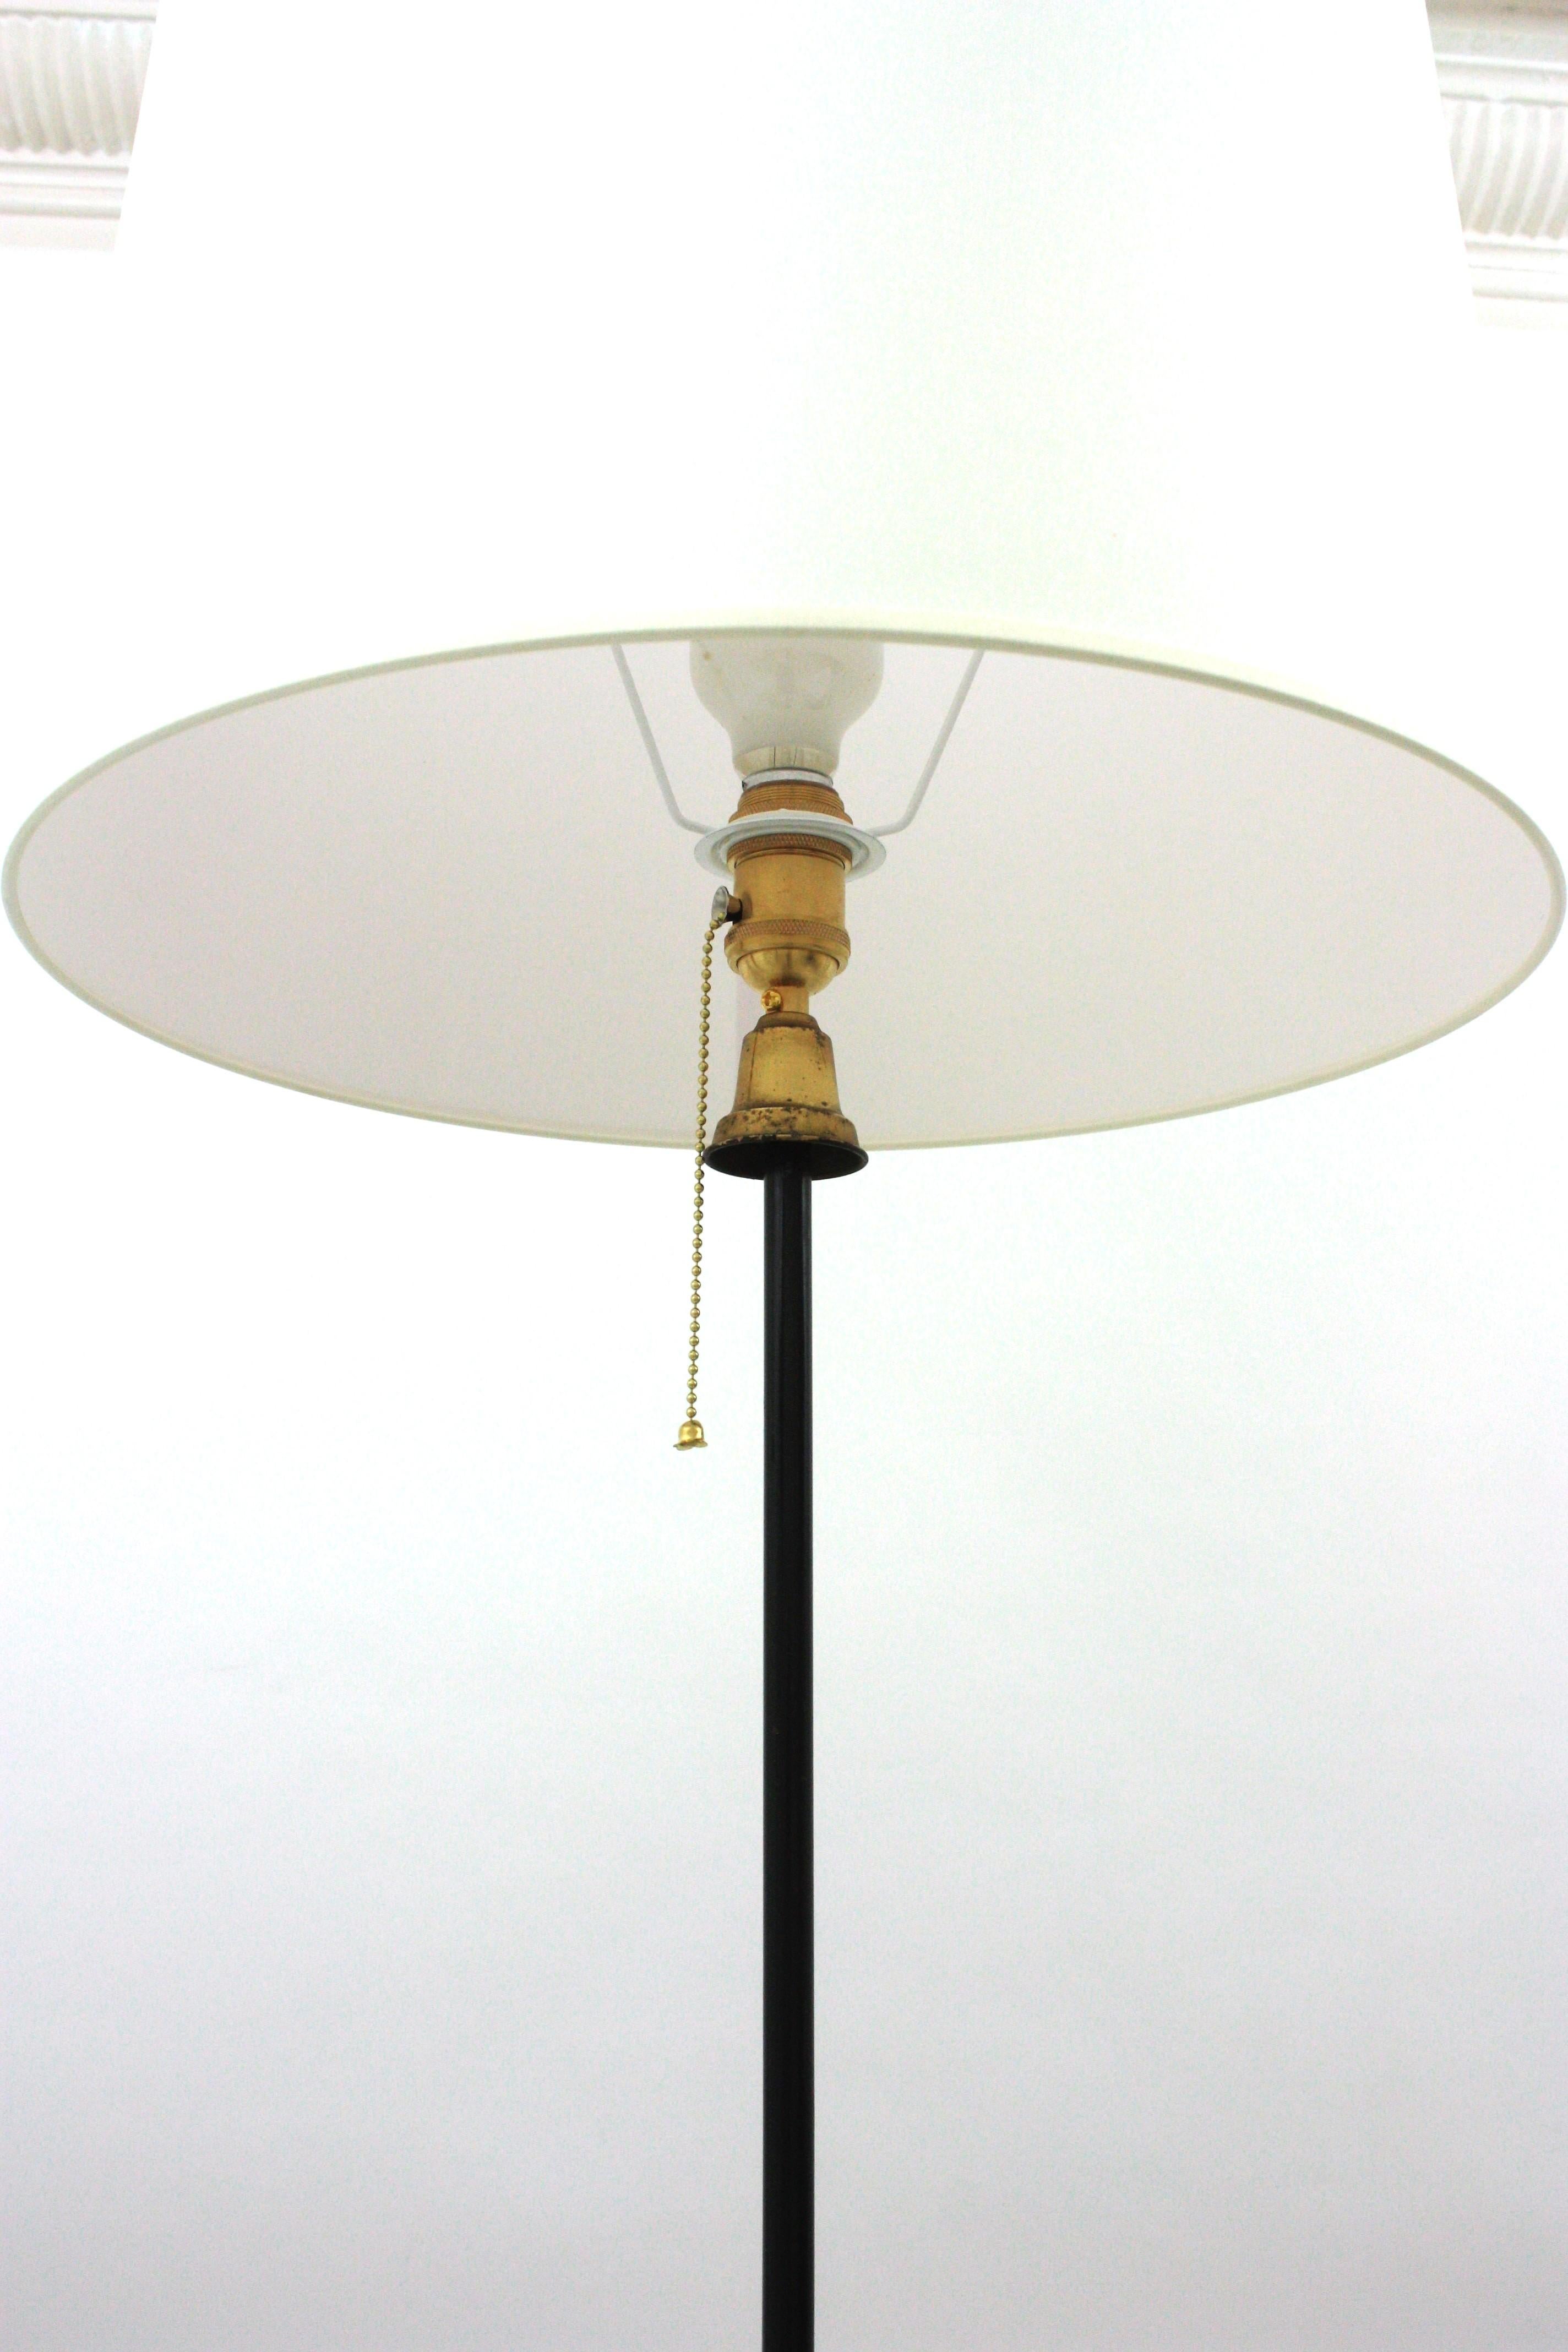 20th Century French Mid-Century Modern Tripod Floor Lamp For Sale